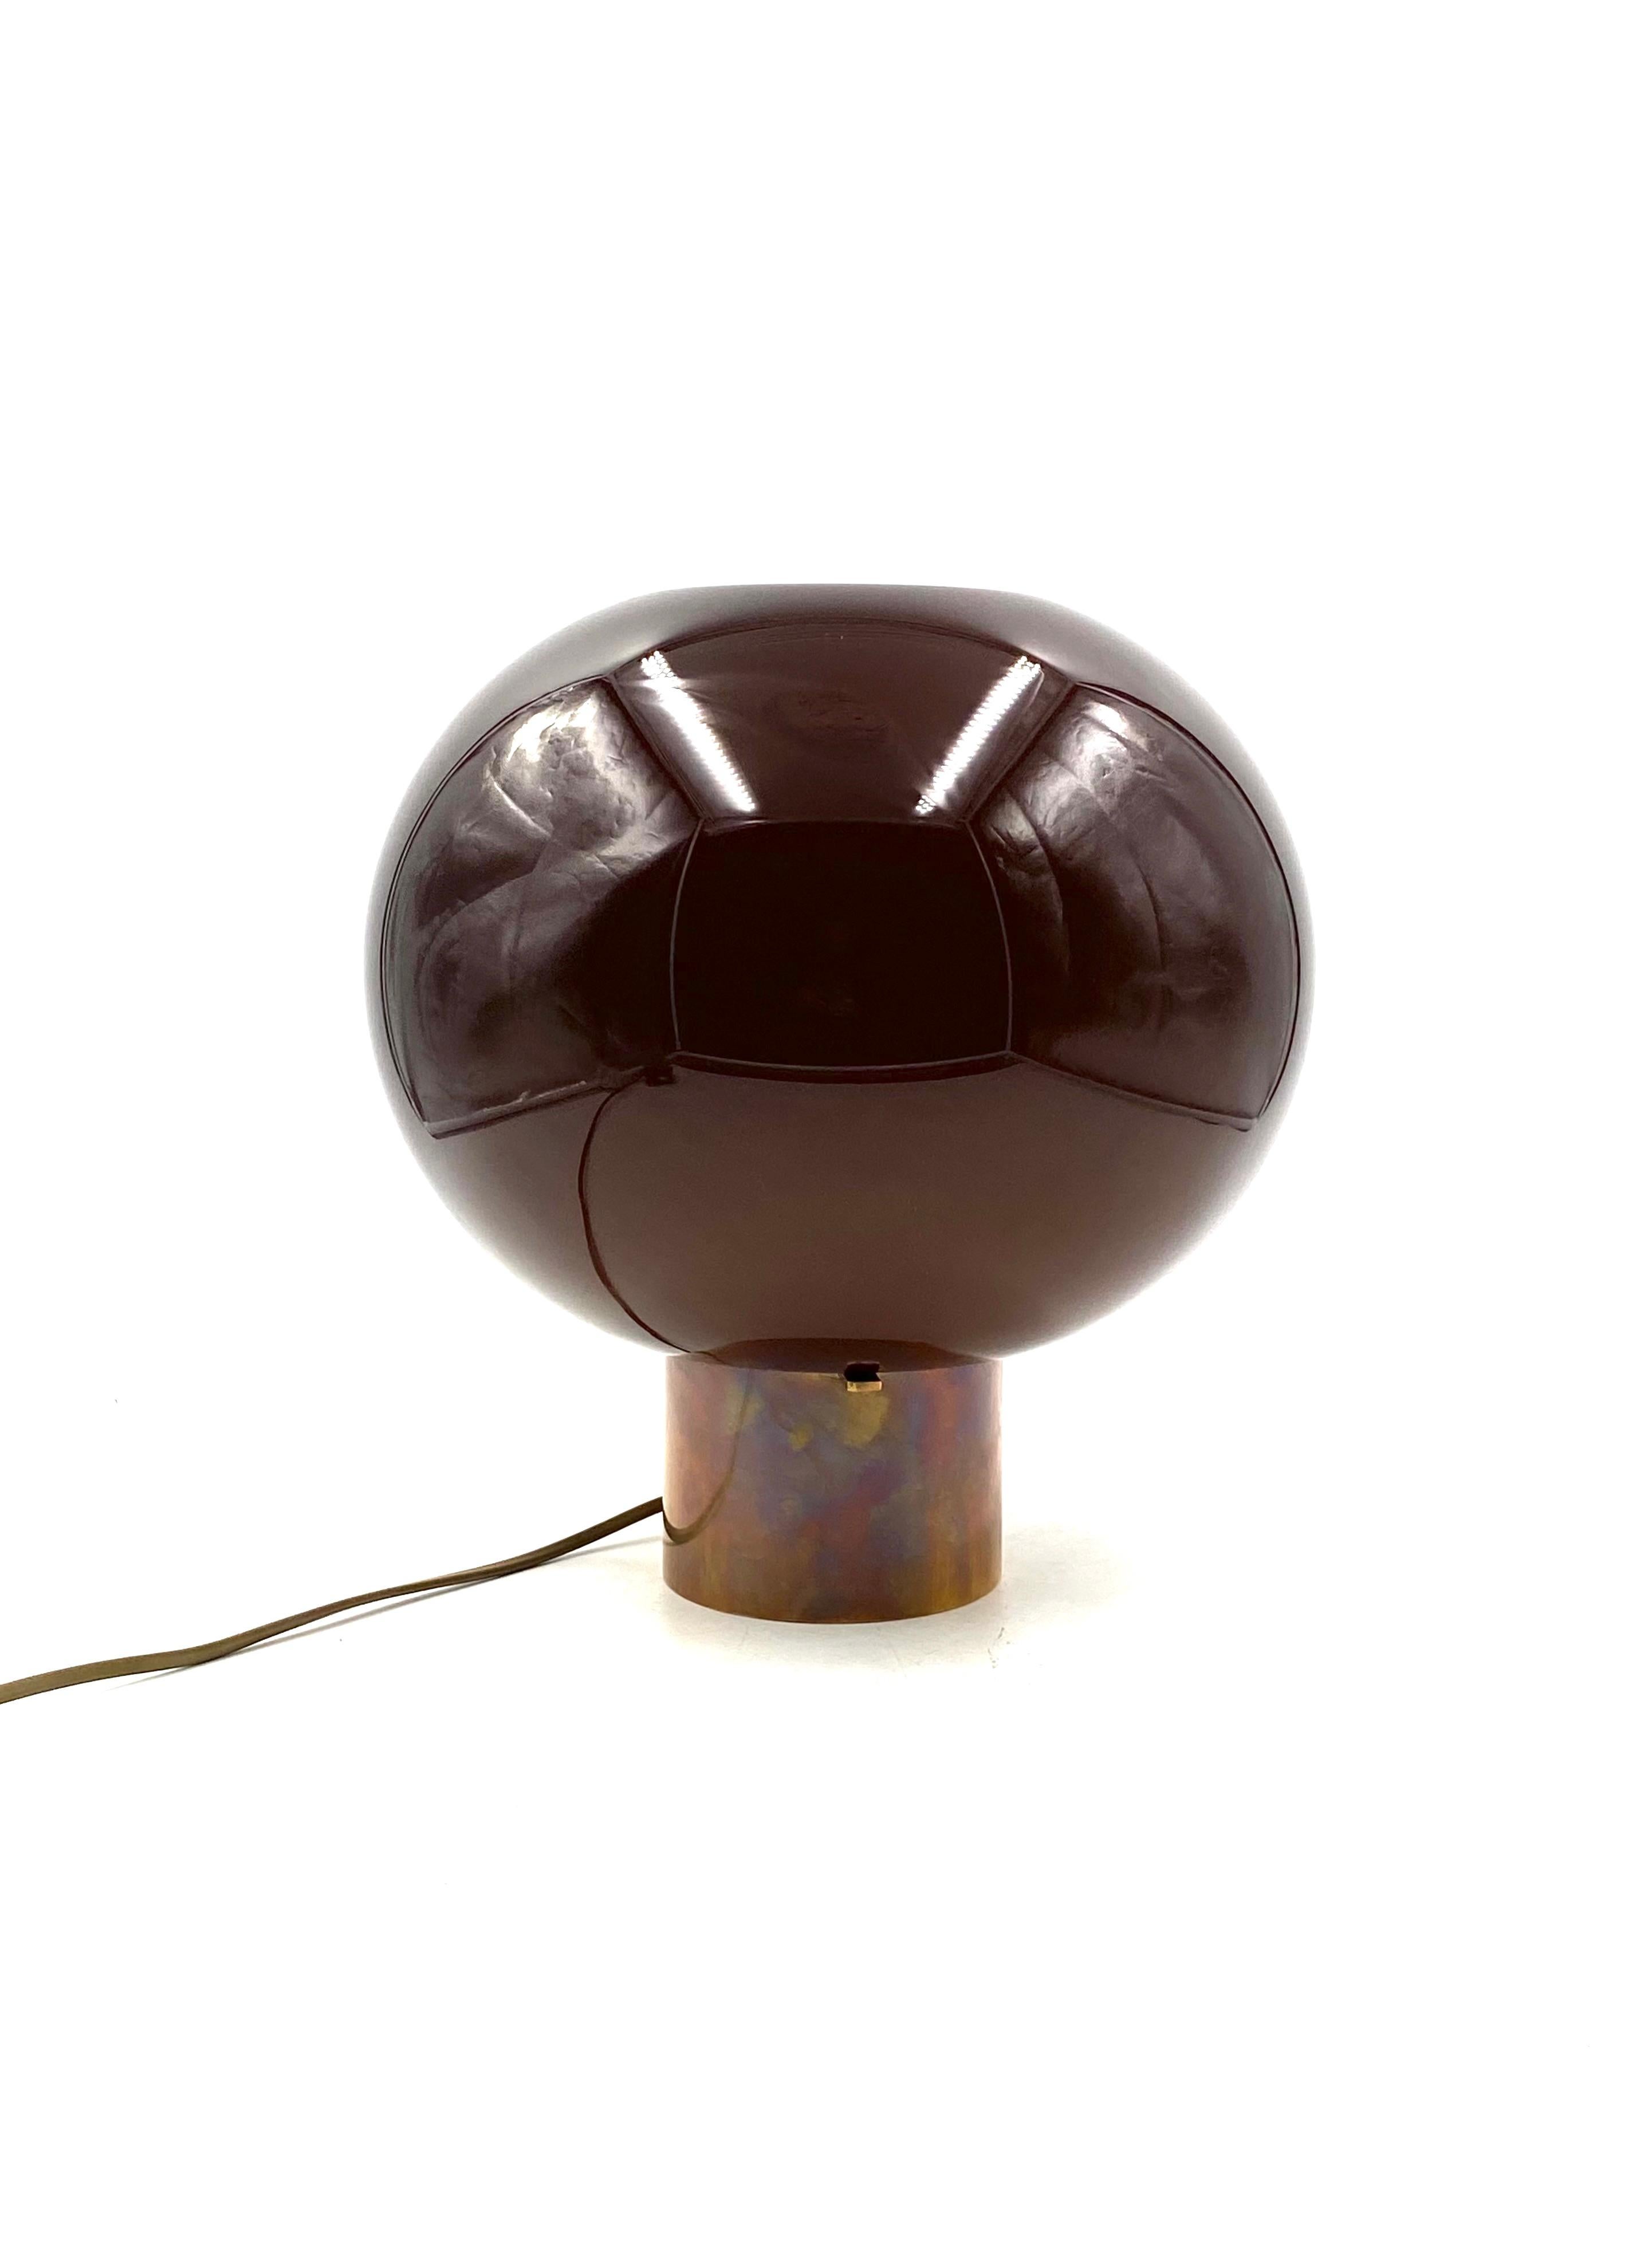 Tabacco brown Murano glass mushroom table lamp, Italy 1980s For Sale 8